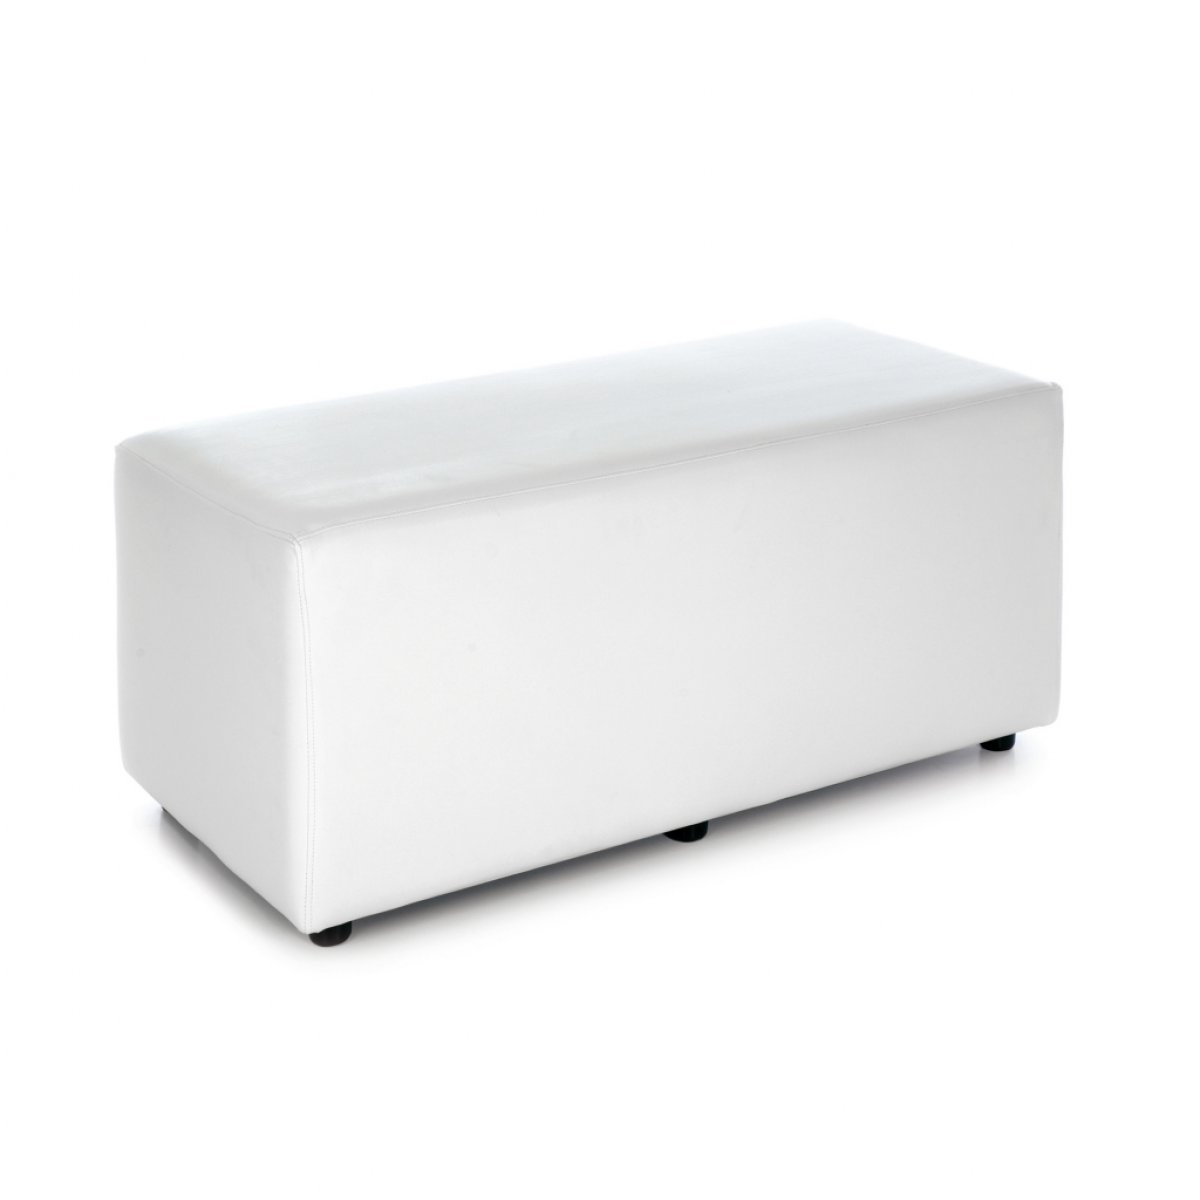 Banquette lounge blanche rectangulaire